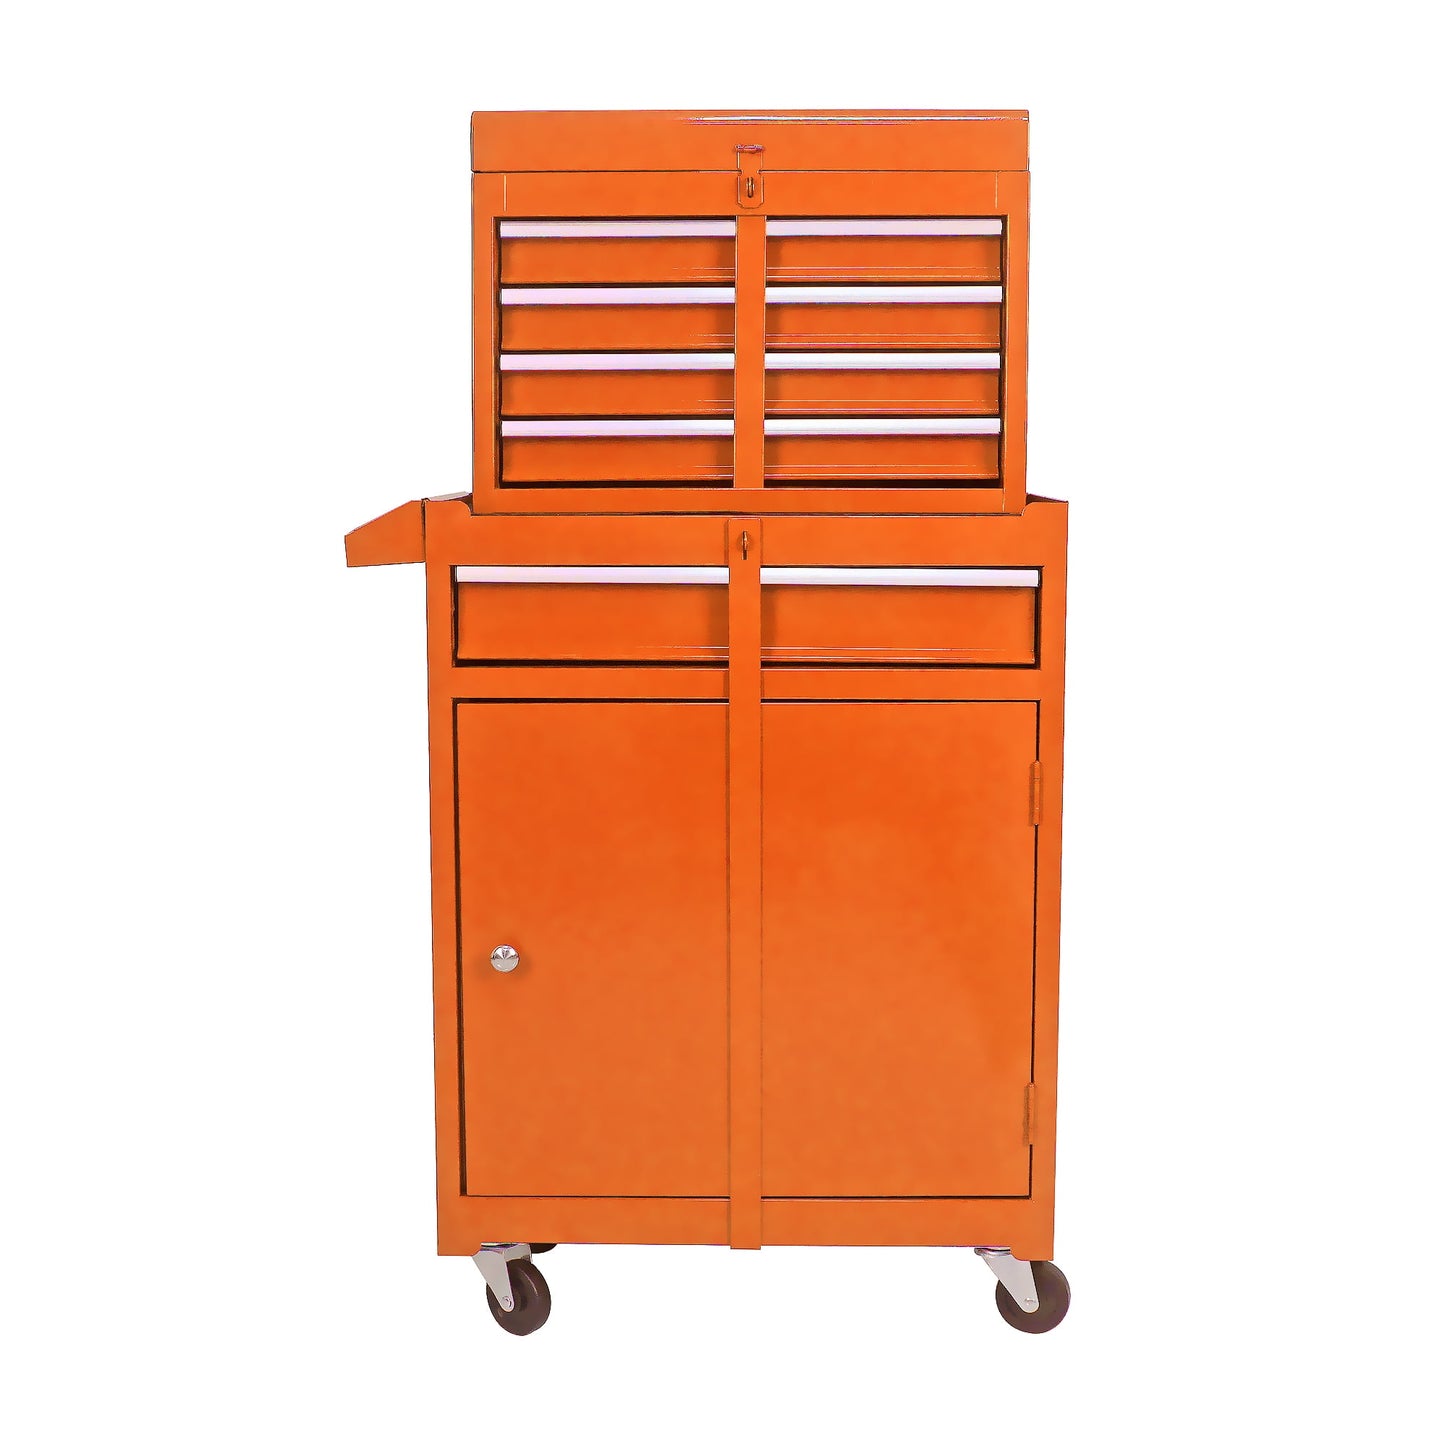 Rolling Tool Chest and Cabinet, Stainless Steel Tool Box with Brake Wheels and 5 Drawers, Orange Detachable Tool Cart, 18.5"L x 11"W x 37.2"H